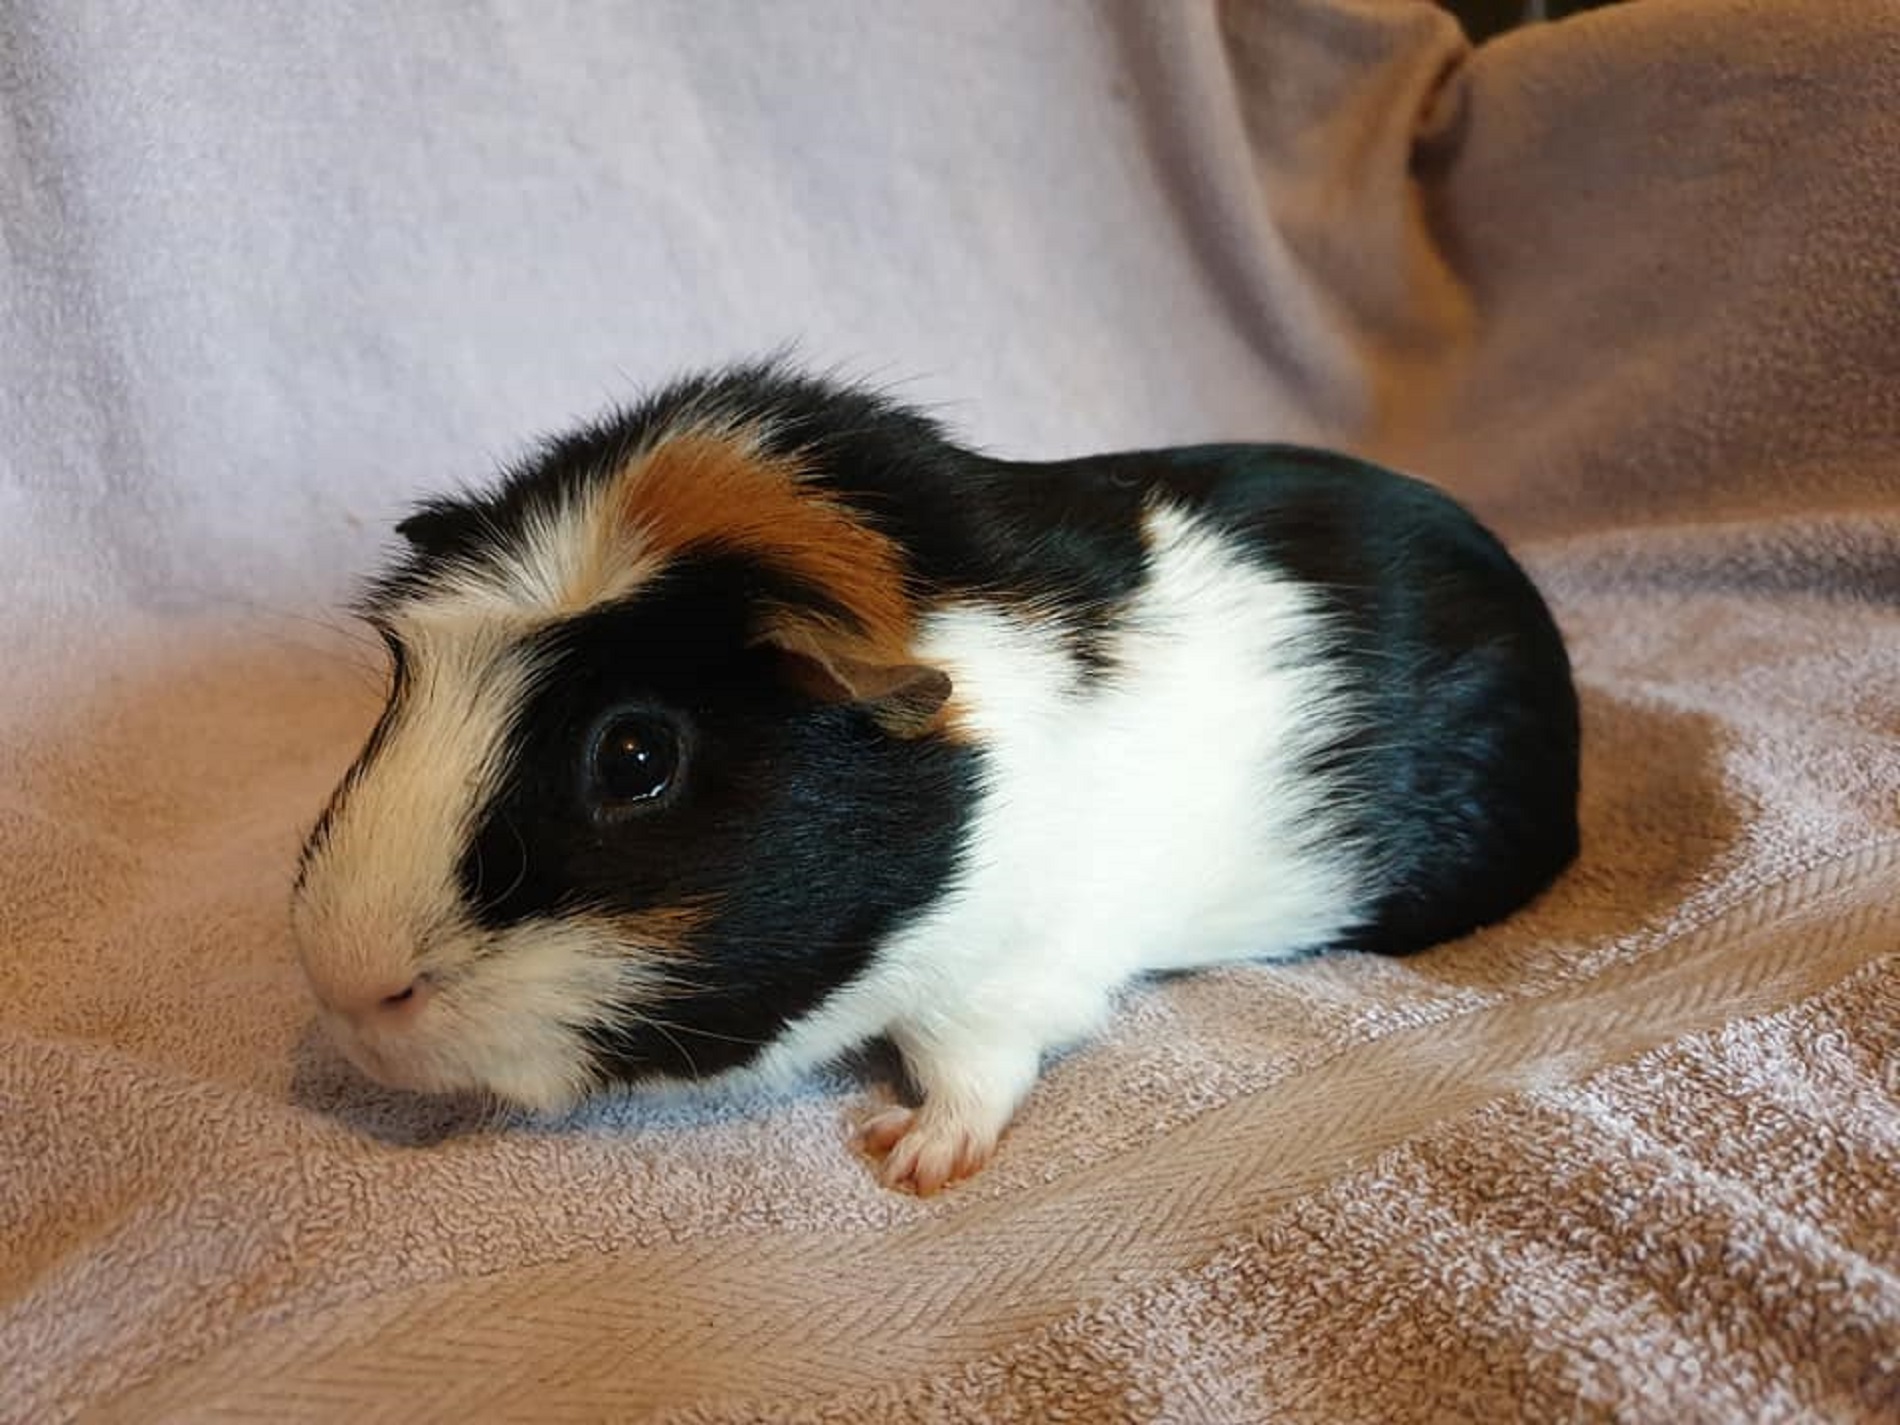 TWINKLE (was TINKY) Sept 2017 to March 14th 2021